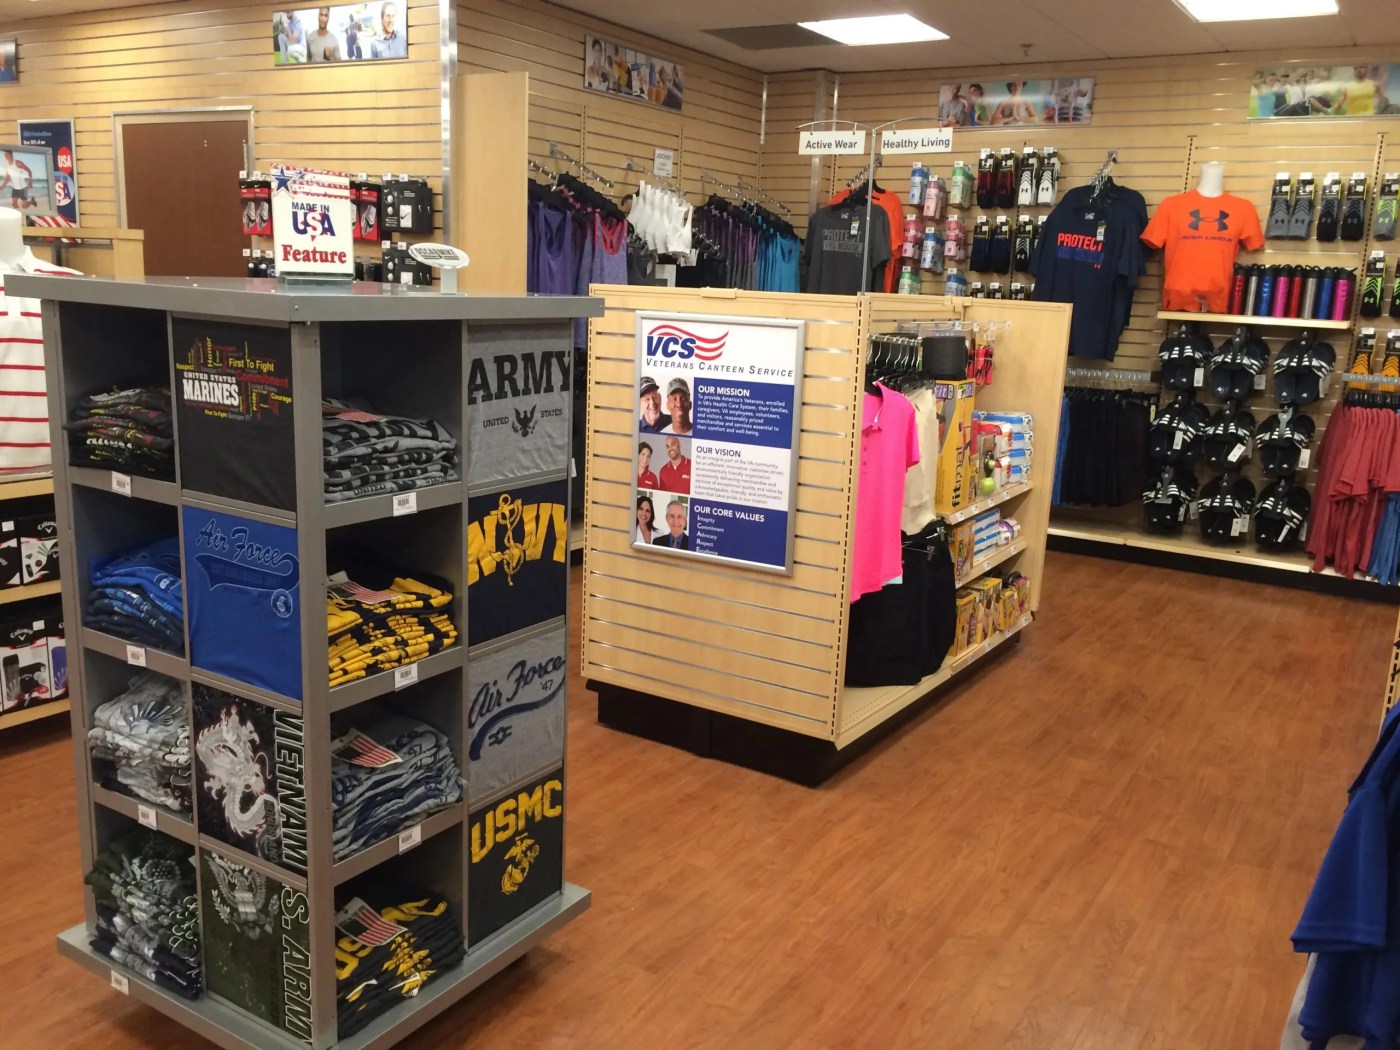 PatriotStore at the VA Medical Center in Lake Nona, Florida. In recent years, the canteen service remodeled its retail stores to provide a better shopping experience for patients, staff, and visitors. (VA)